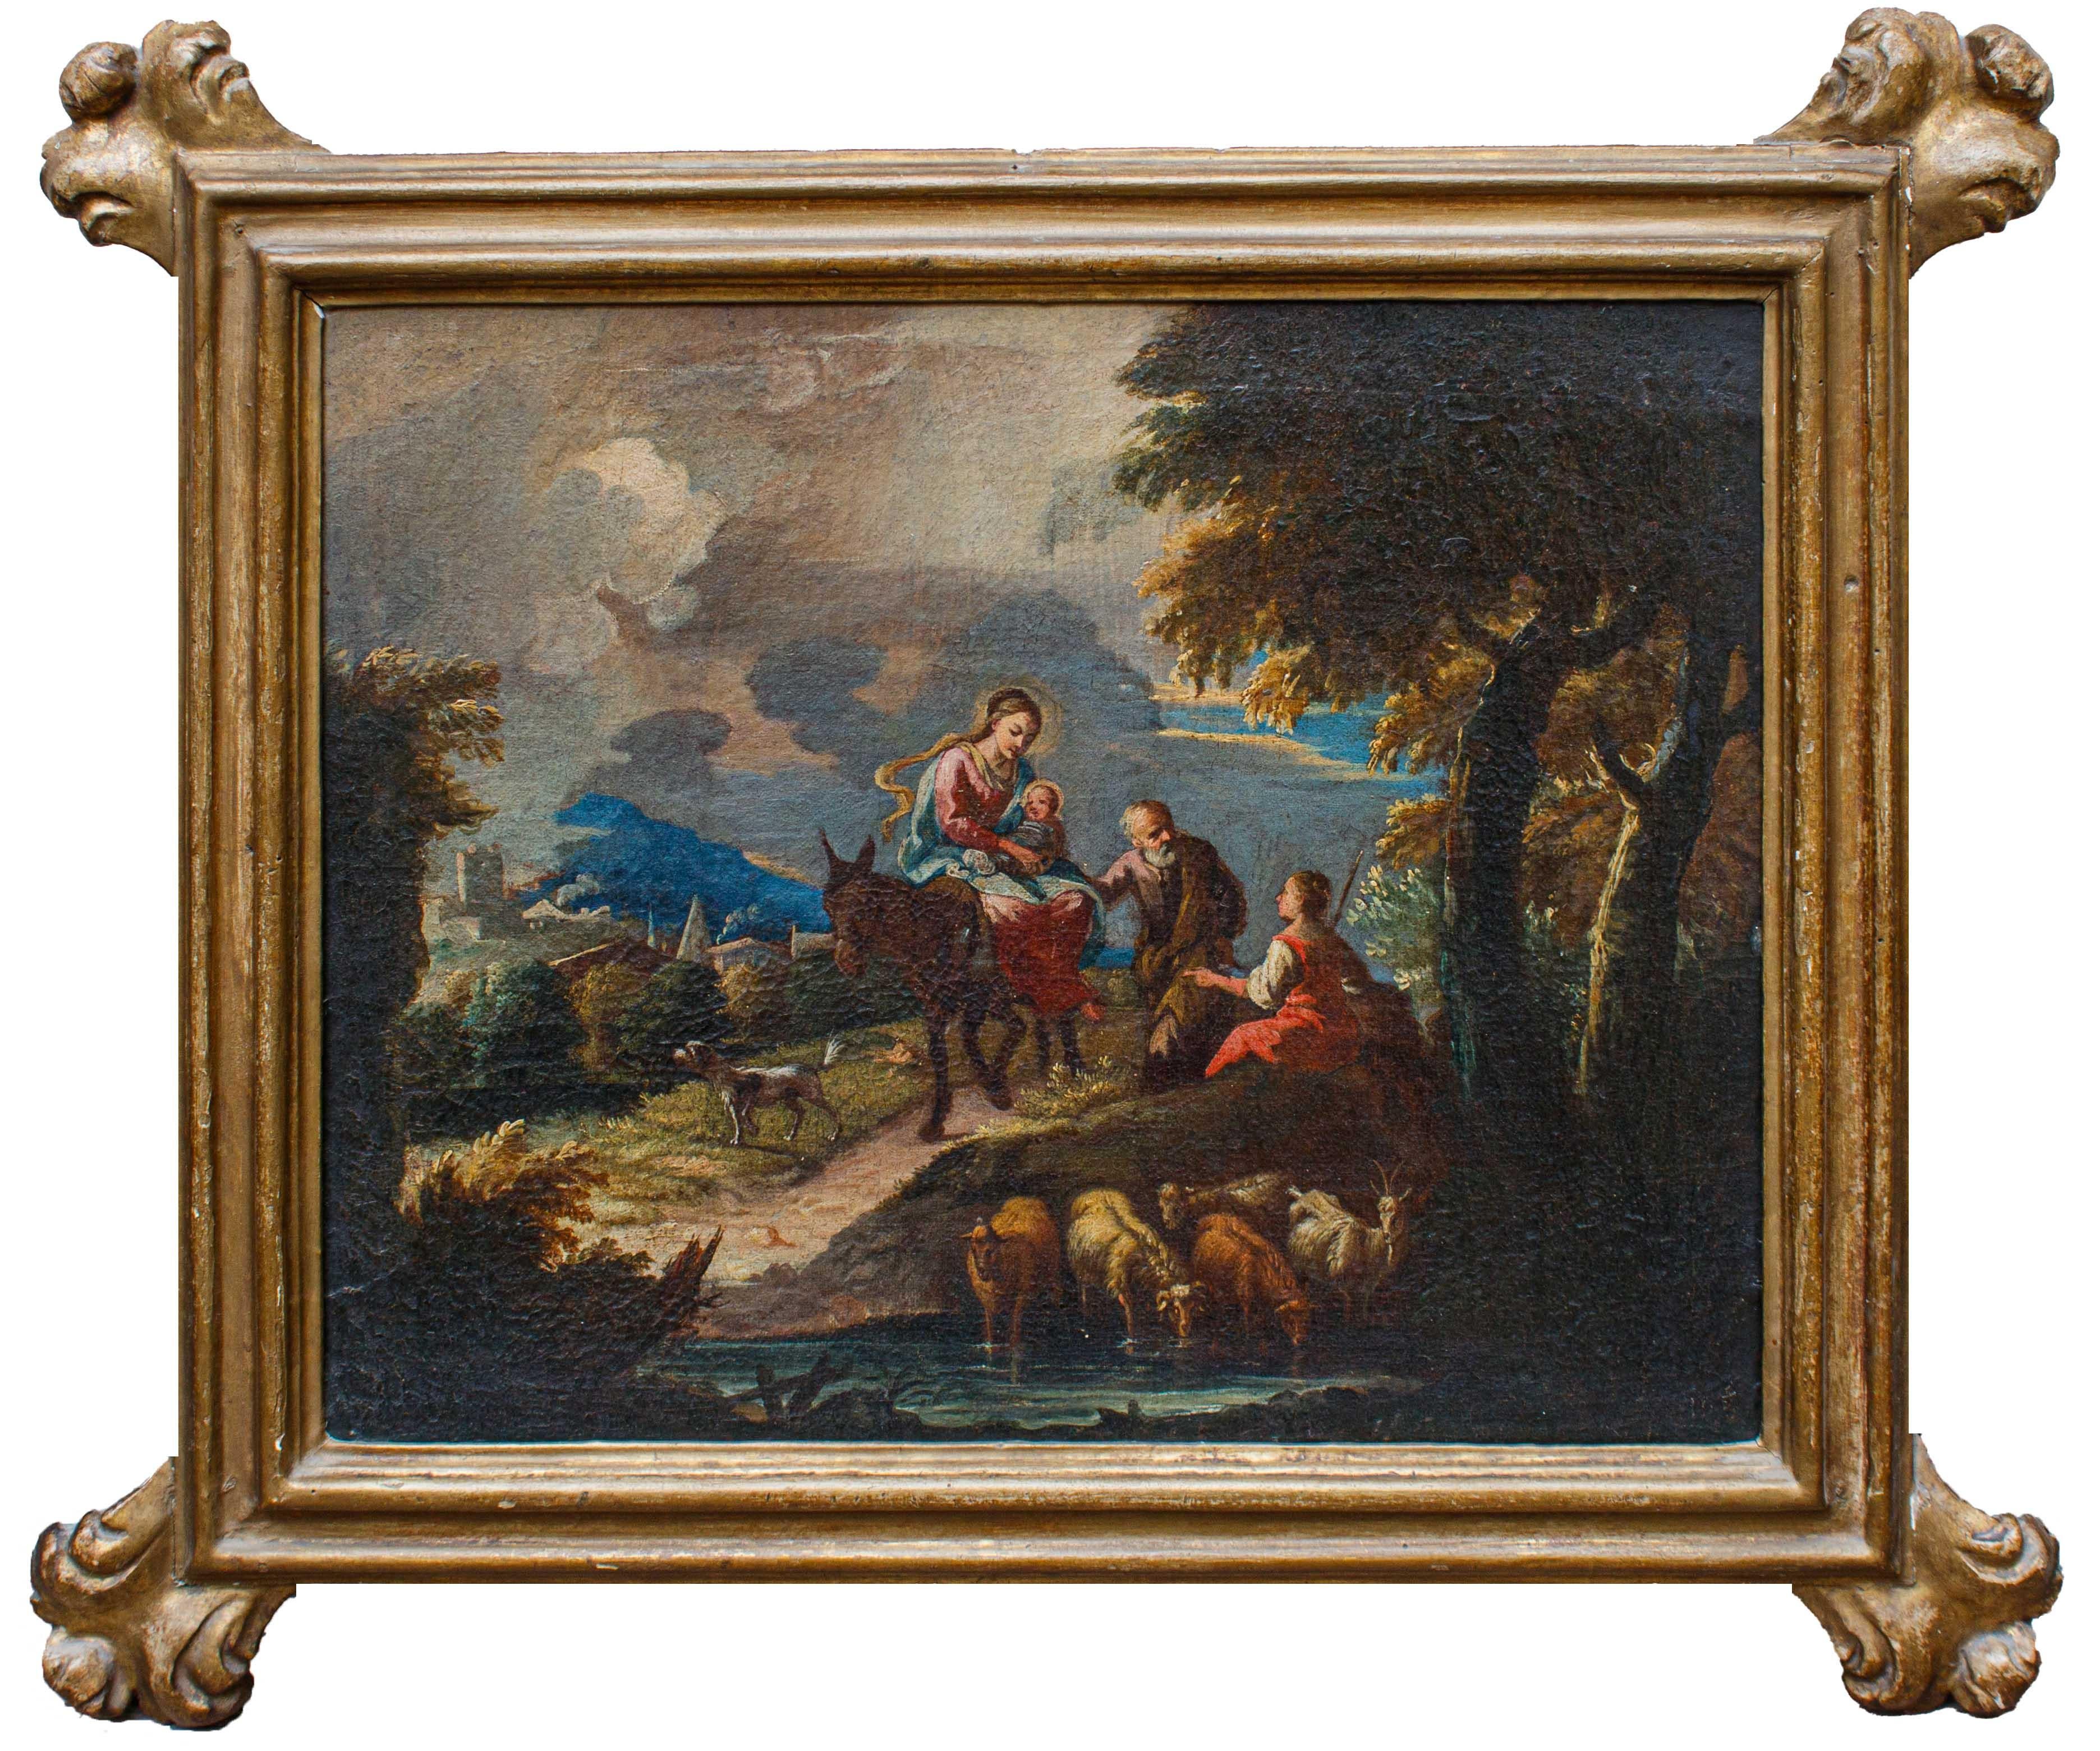 Giuseppe Roncelli (Candia, 1663 - Bergamo, 1729)

Rest on the Flight into Egypt

Oil on canvas, 55 x 45.5 cm

With Frame, 65 x 77 cm

The painting under consideration, by Giuseppe Roncelli (Candia, 1663 - Bergamo, 1729), depicts the scene of the